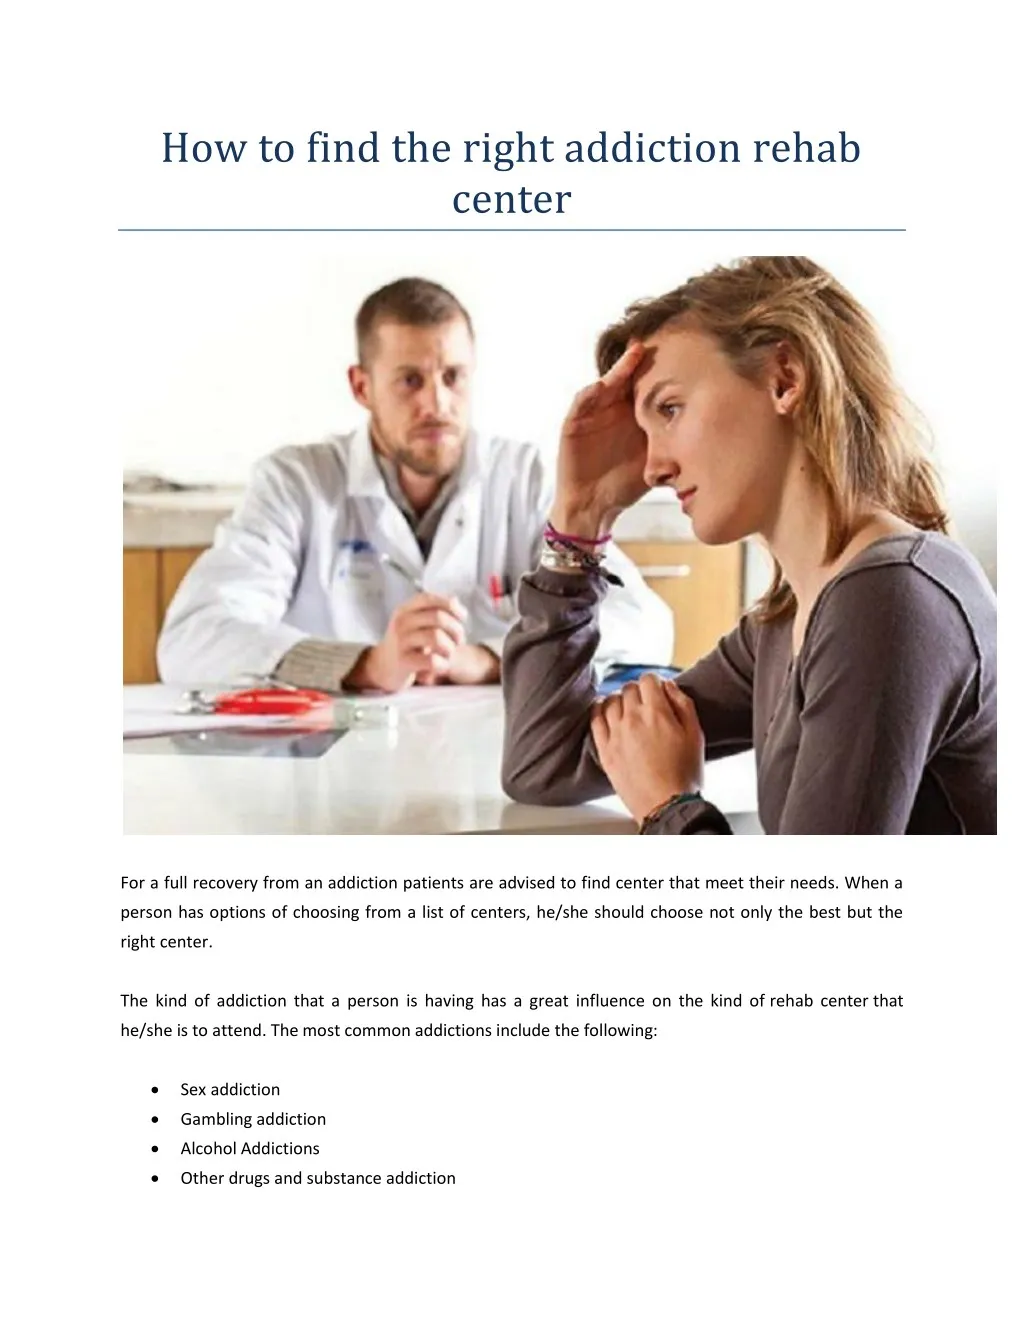 how to find the right addiction rehab center